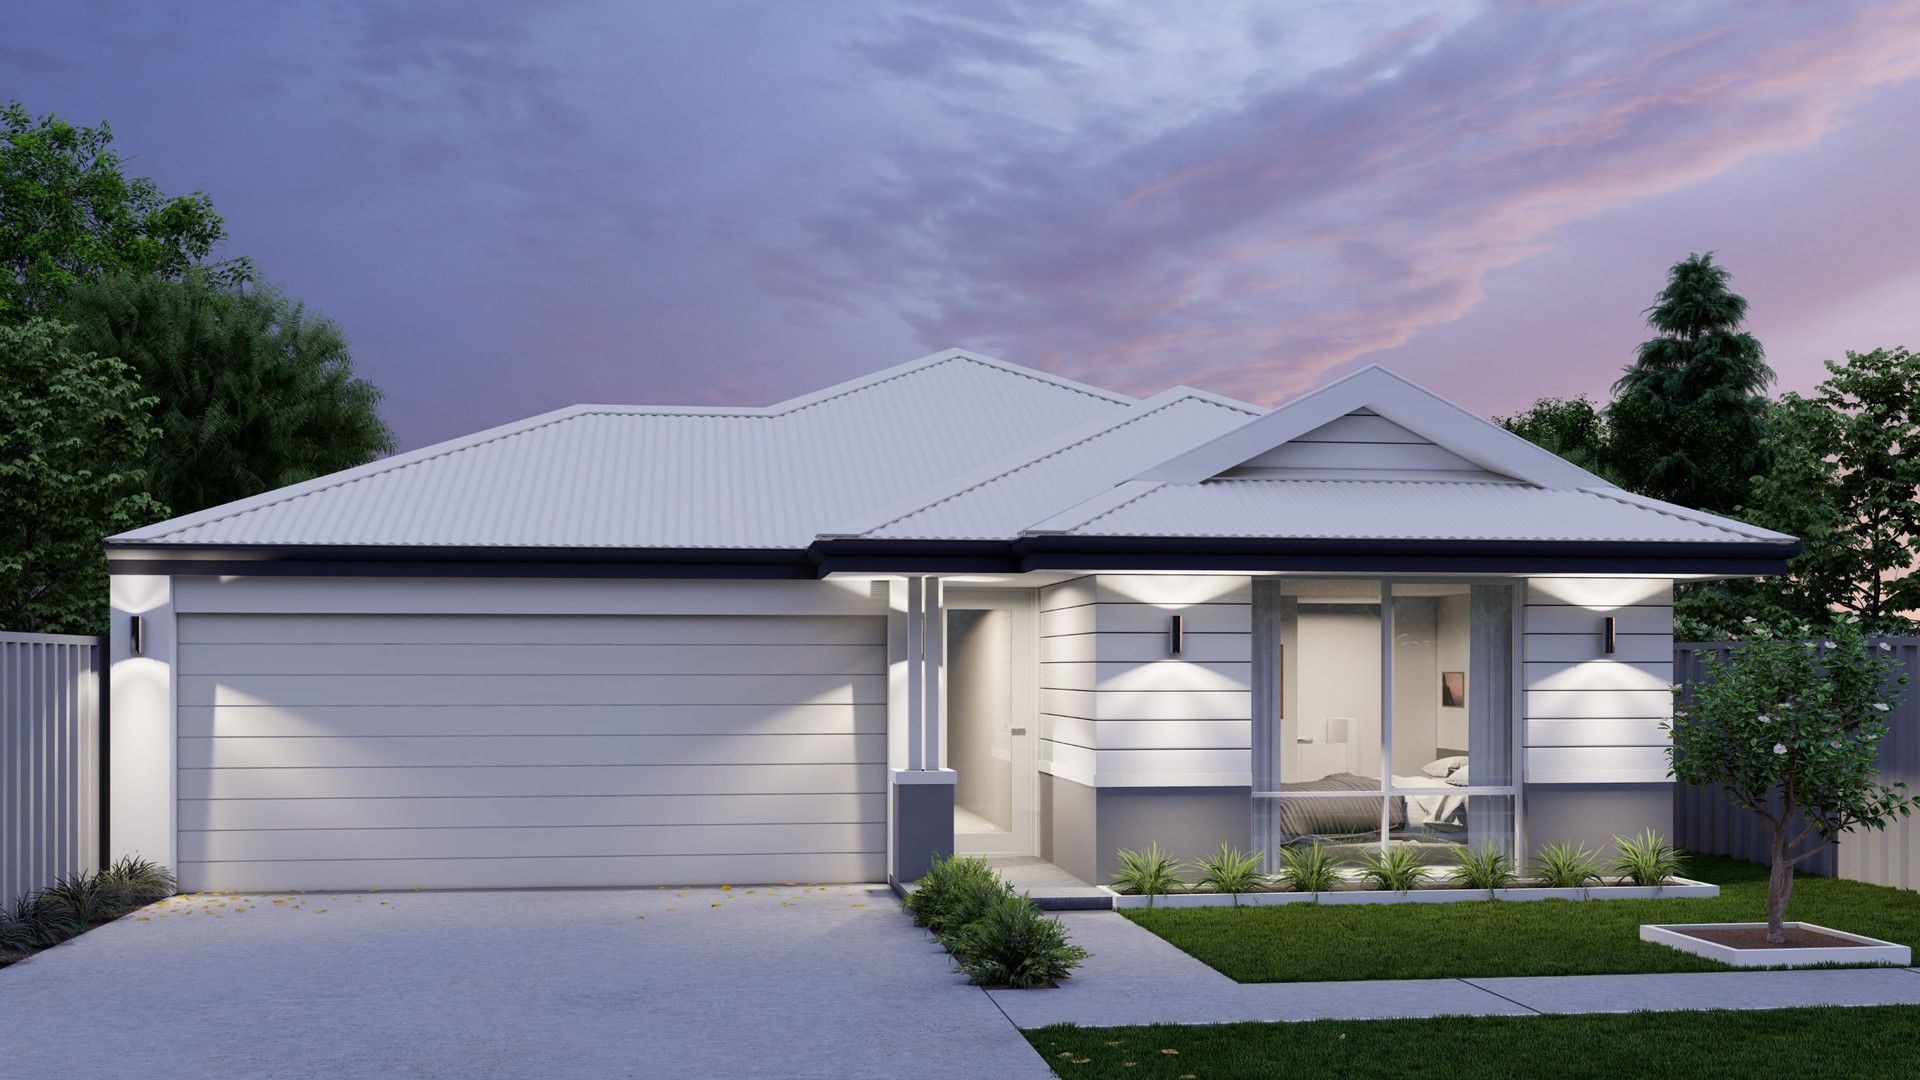 3 bedrooms New House & Land in Address available upon request BALGA WA, 6061